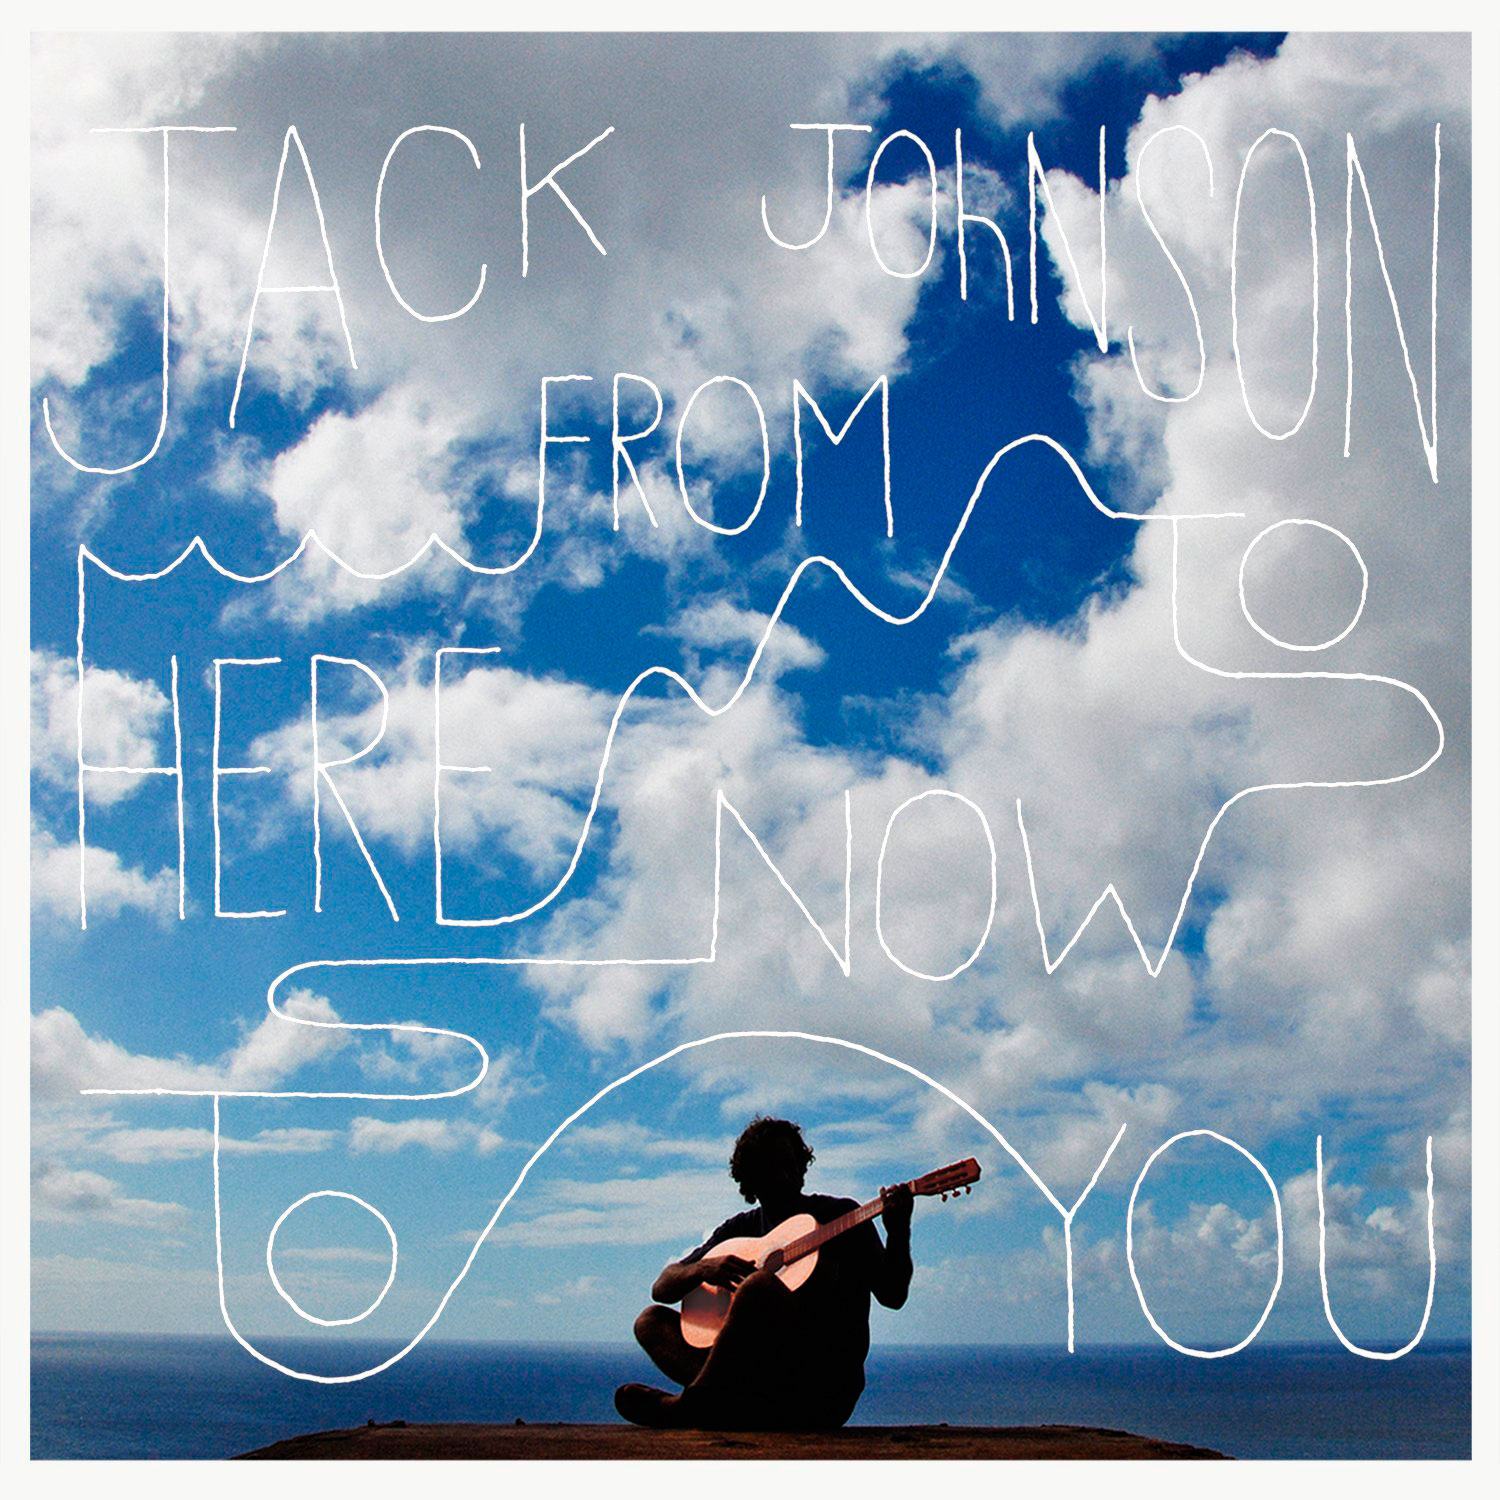 Jack Johnson: From here to now to you, la portada del disco1500 x 1500